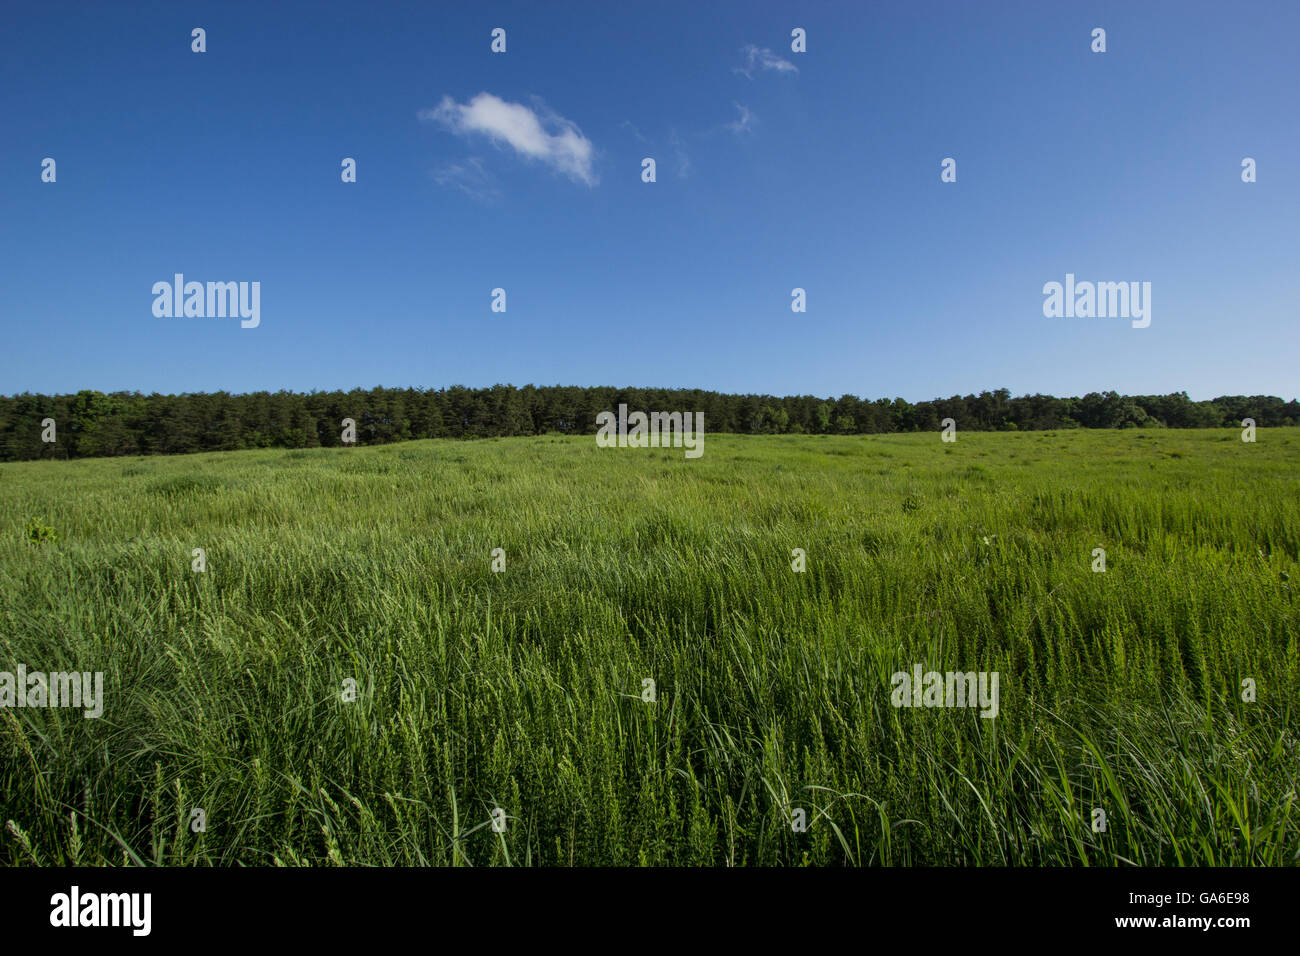 A field of long green grasses under a bright blue sky. Stock Photo